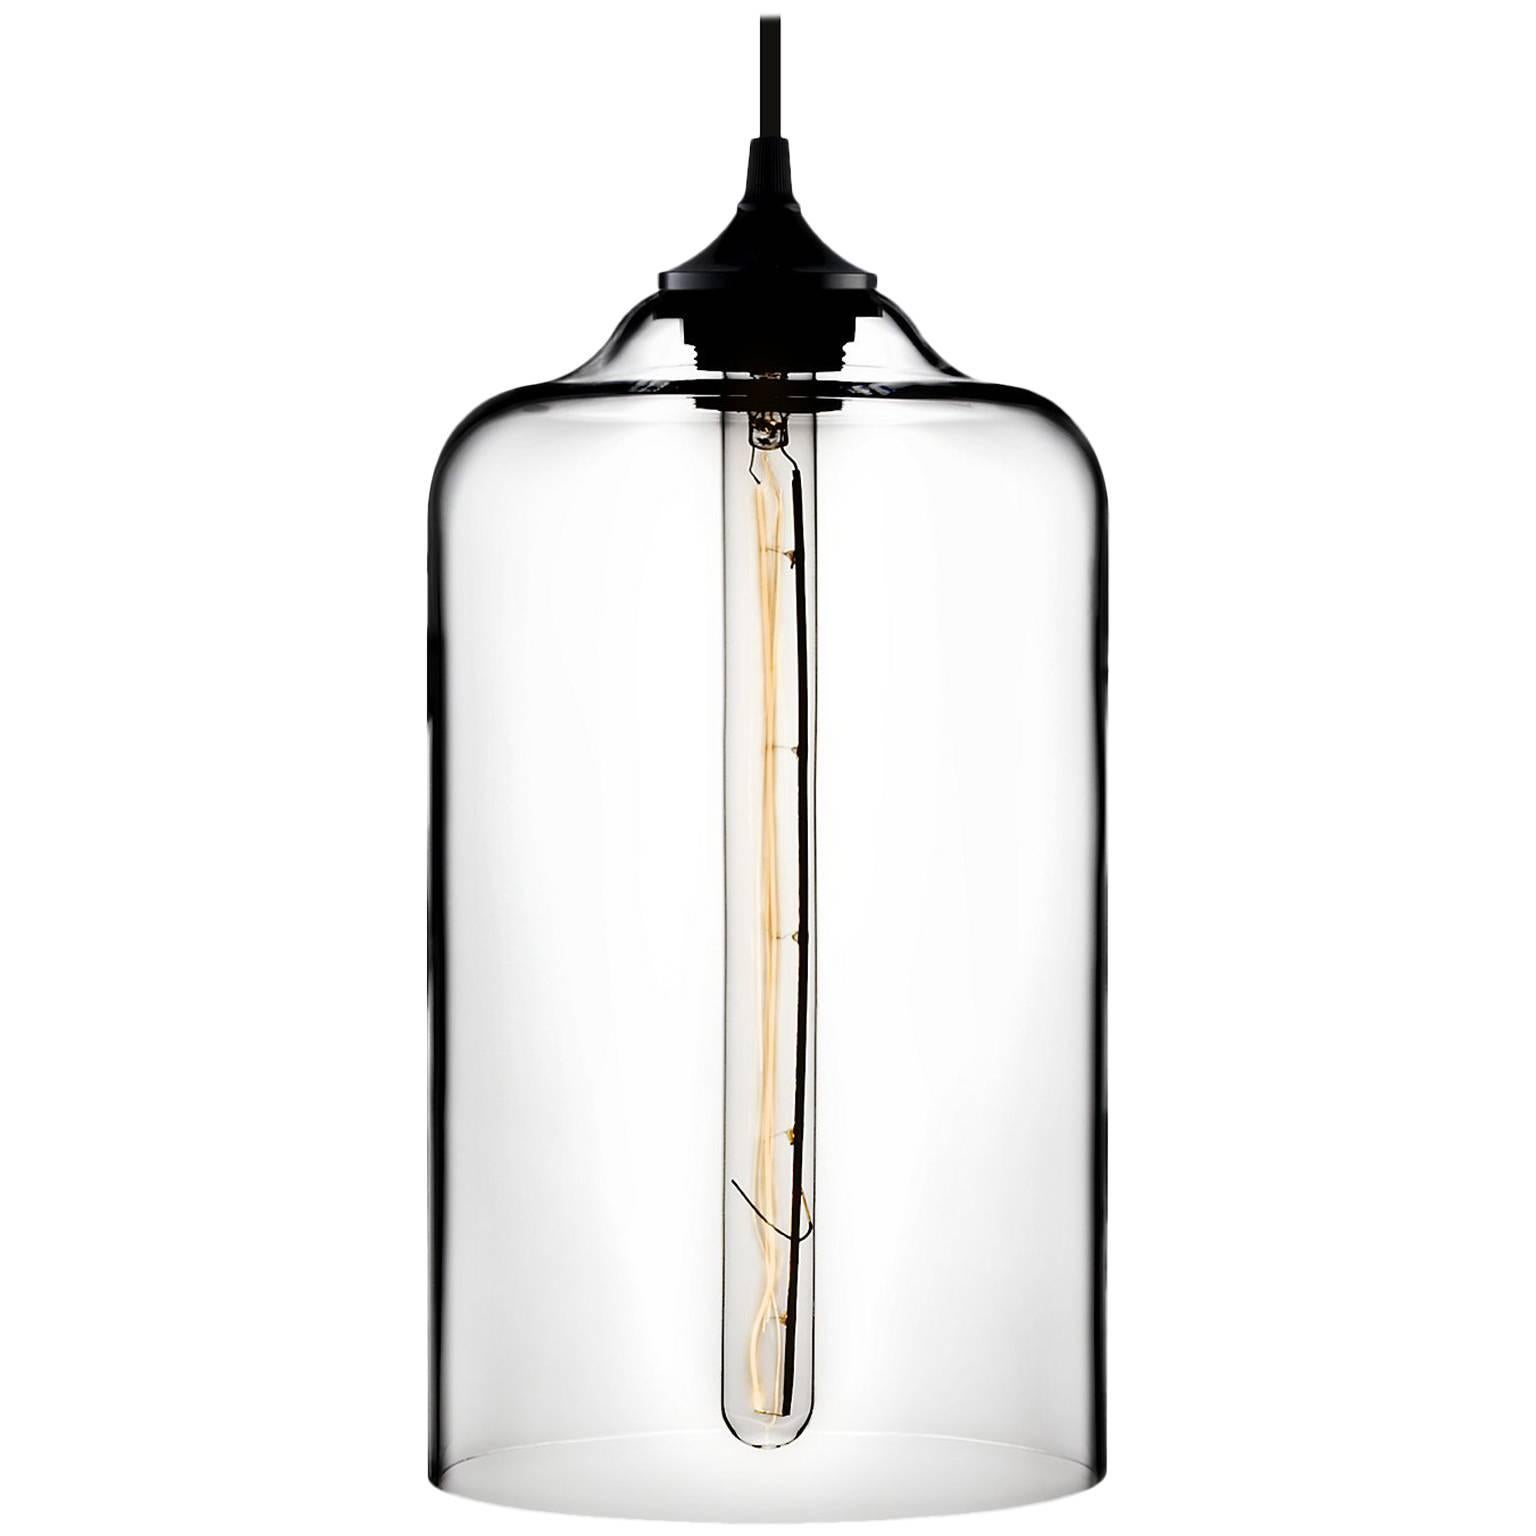 Bella Crystal Handblown Modern Glass Pendant Light, Made in the USA For Sale